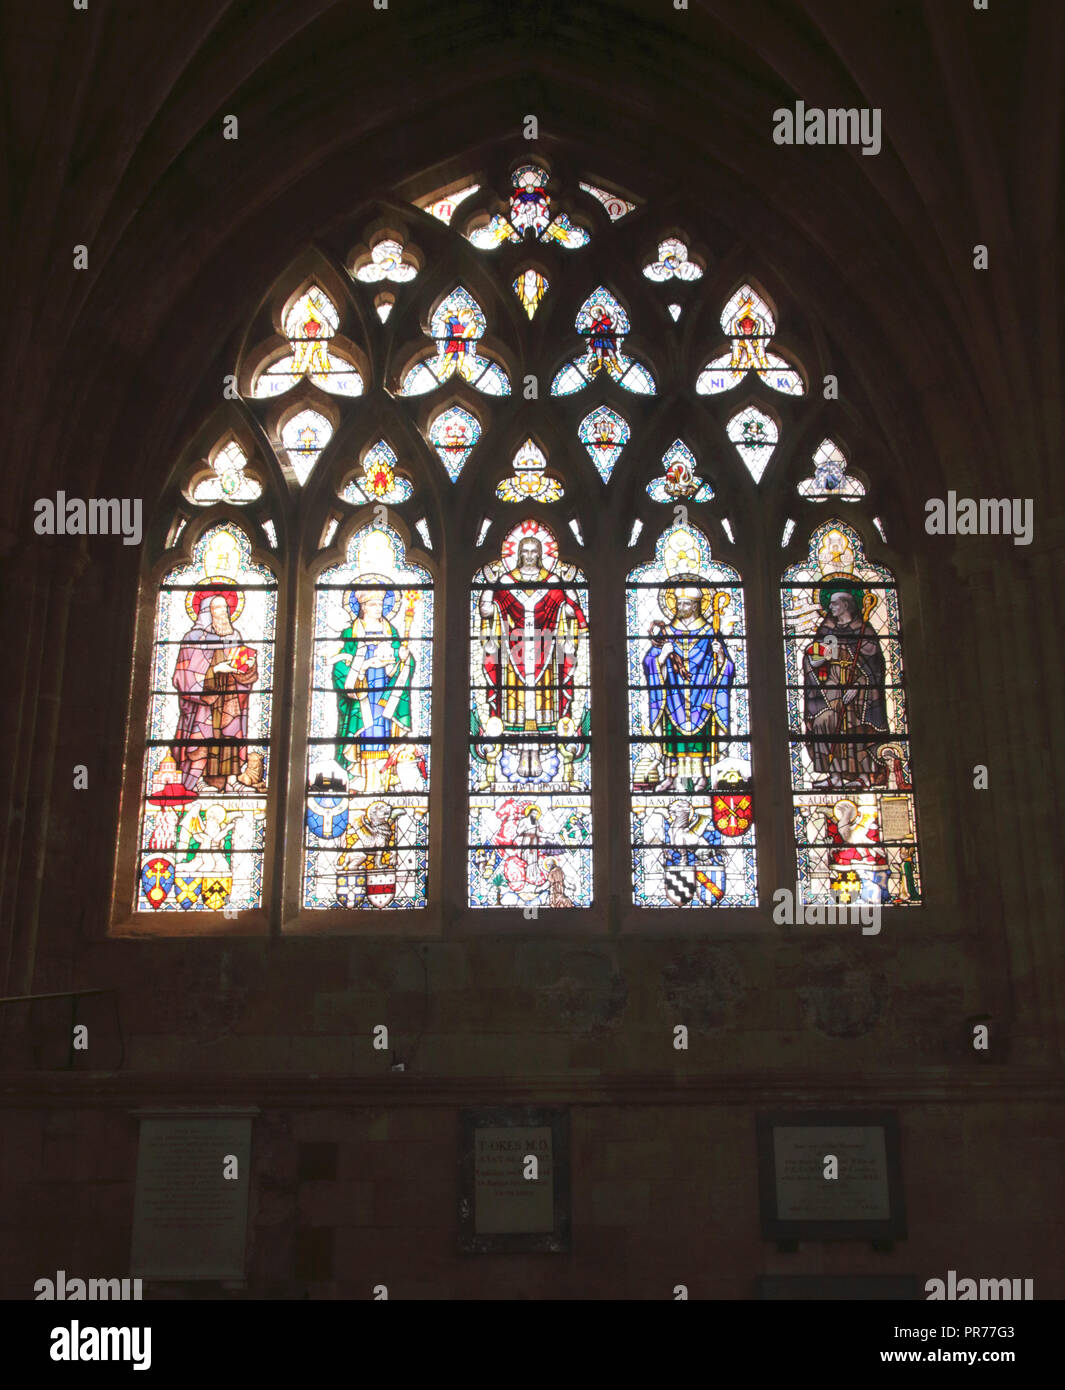 Stained glass window inside Exeter Cathedral Devon England Stock Photo